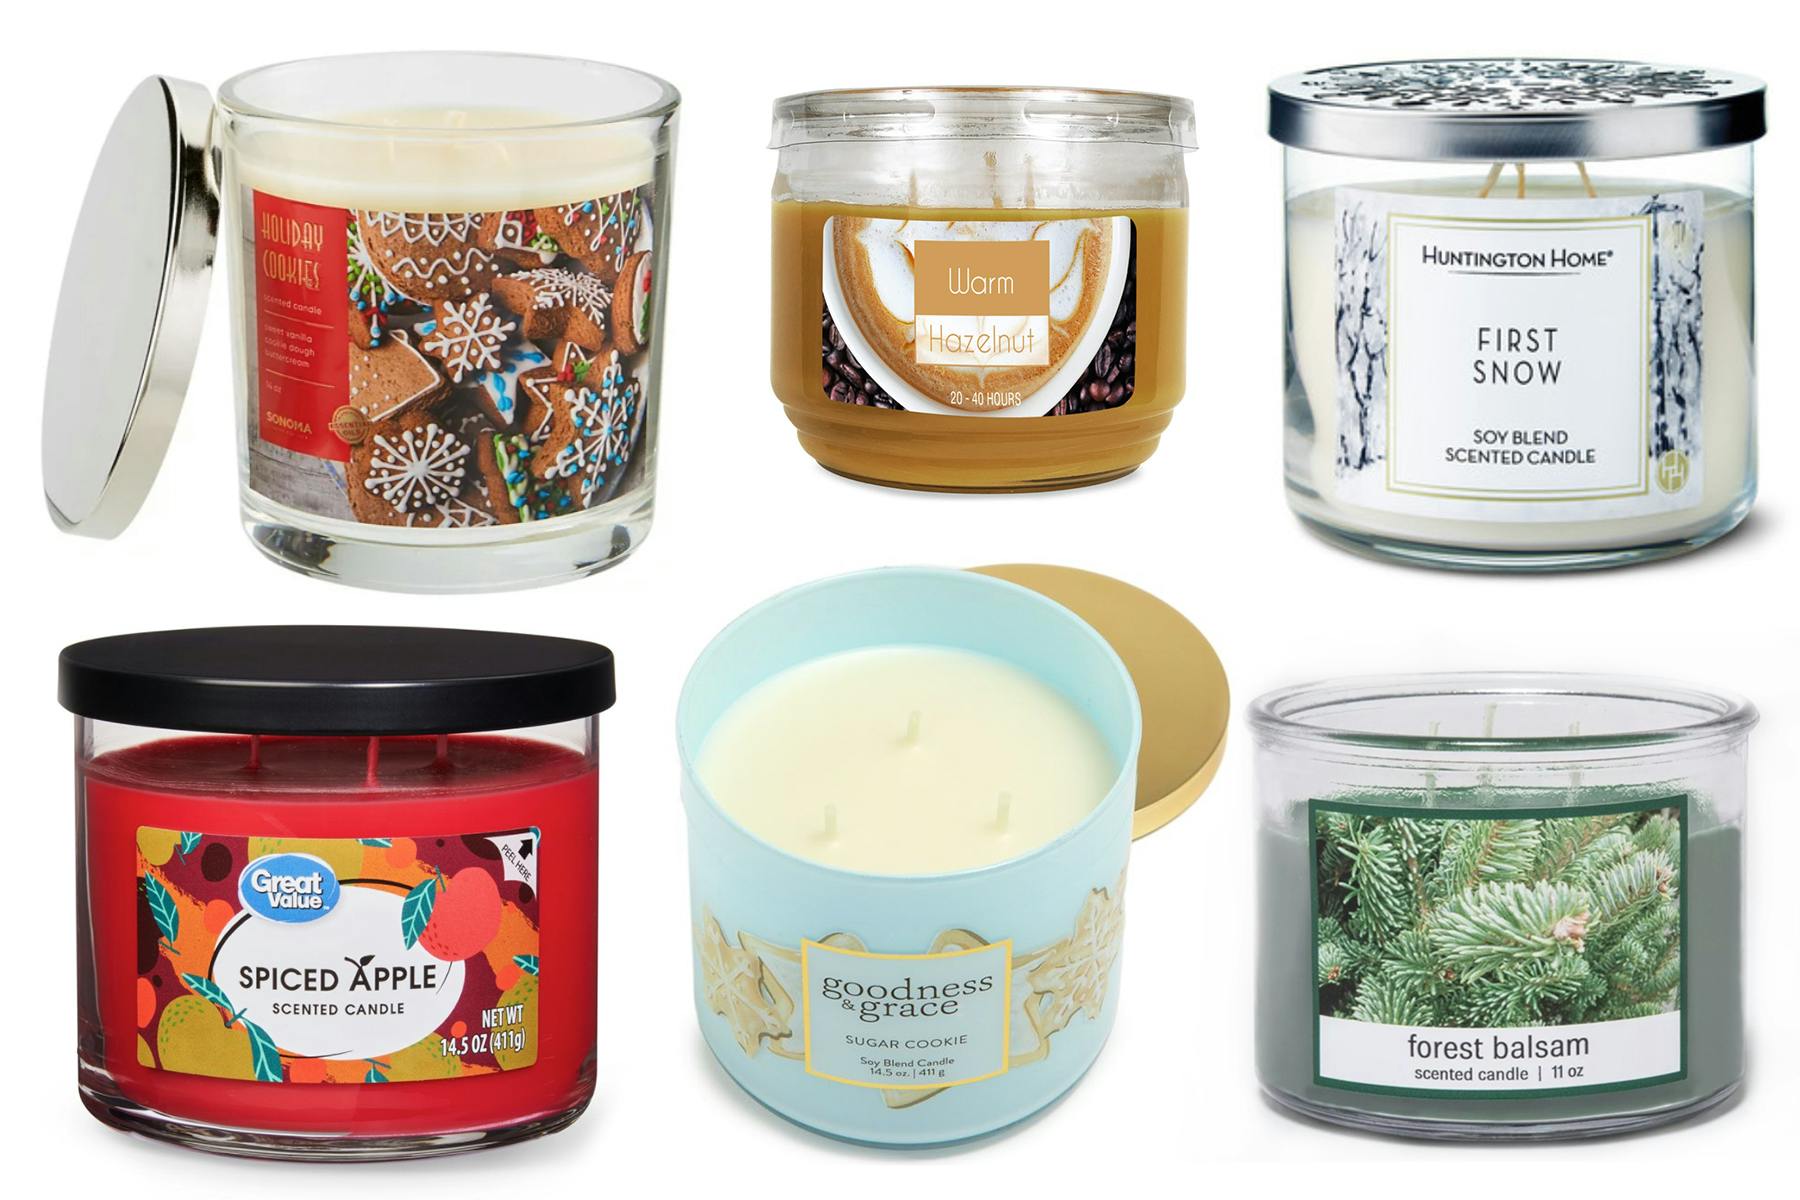 Buy 1 Get 1 25% OFF Bath & Body Works Fall Winter 2018 3 Wick Candles 